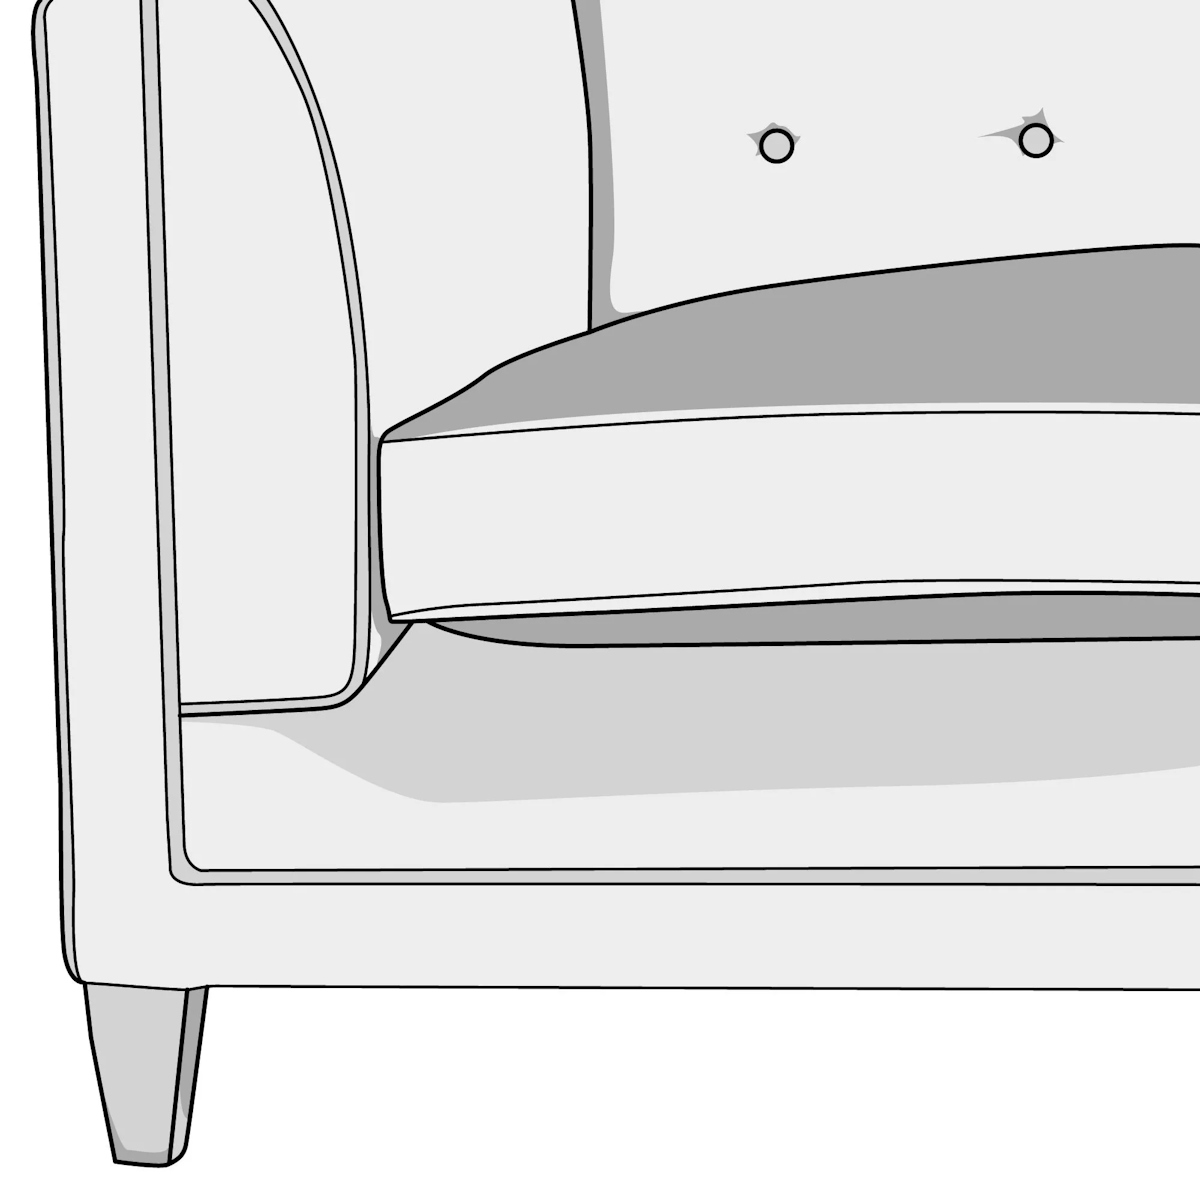 Illustration of tapered block foot style sofa